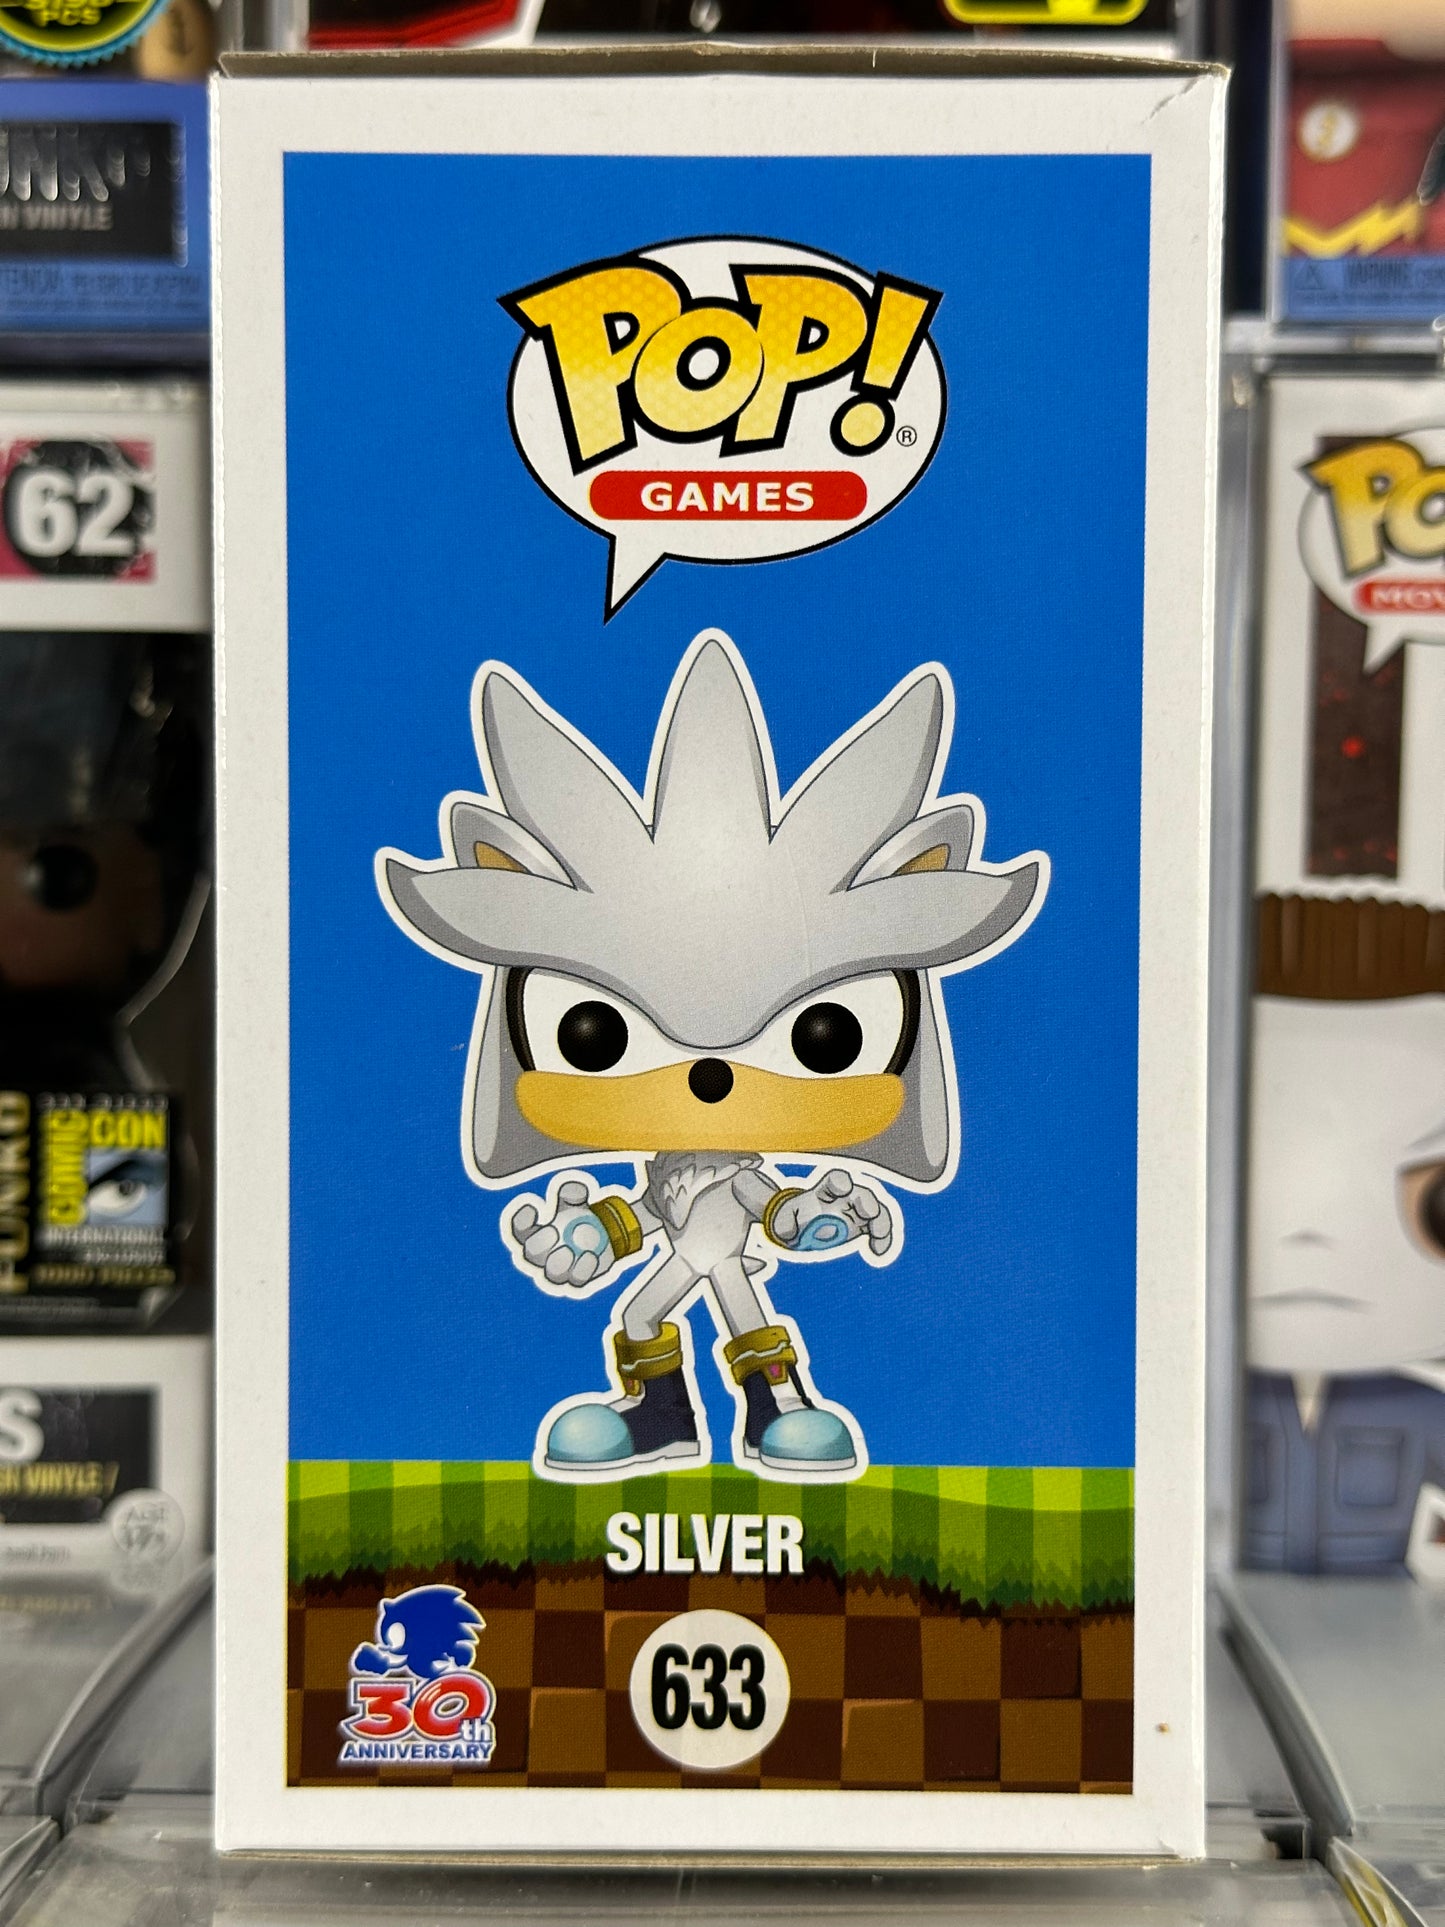 Sonic the Hedgehog - Silver (Glow in the Dark) (633)